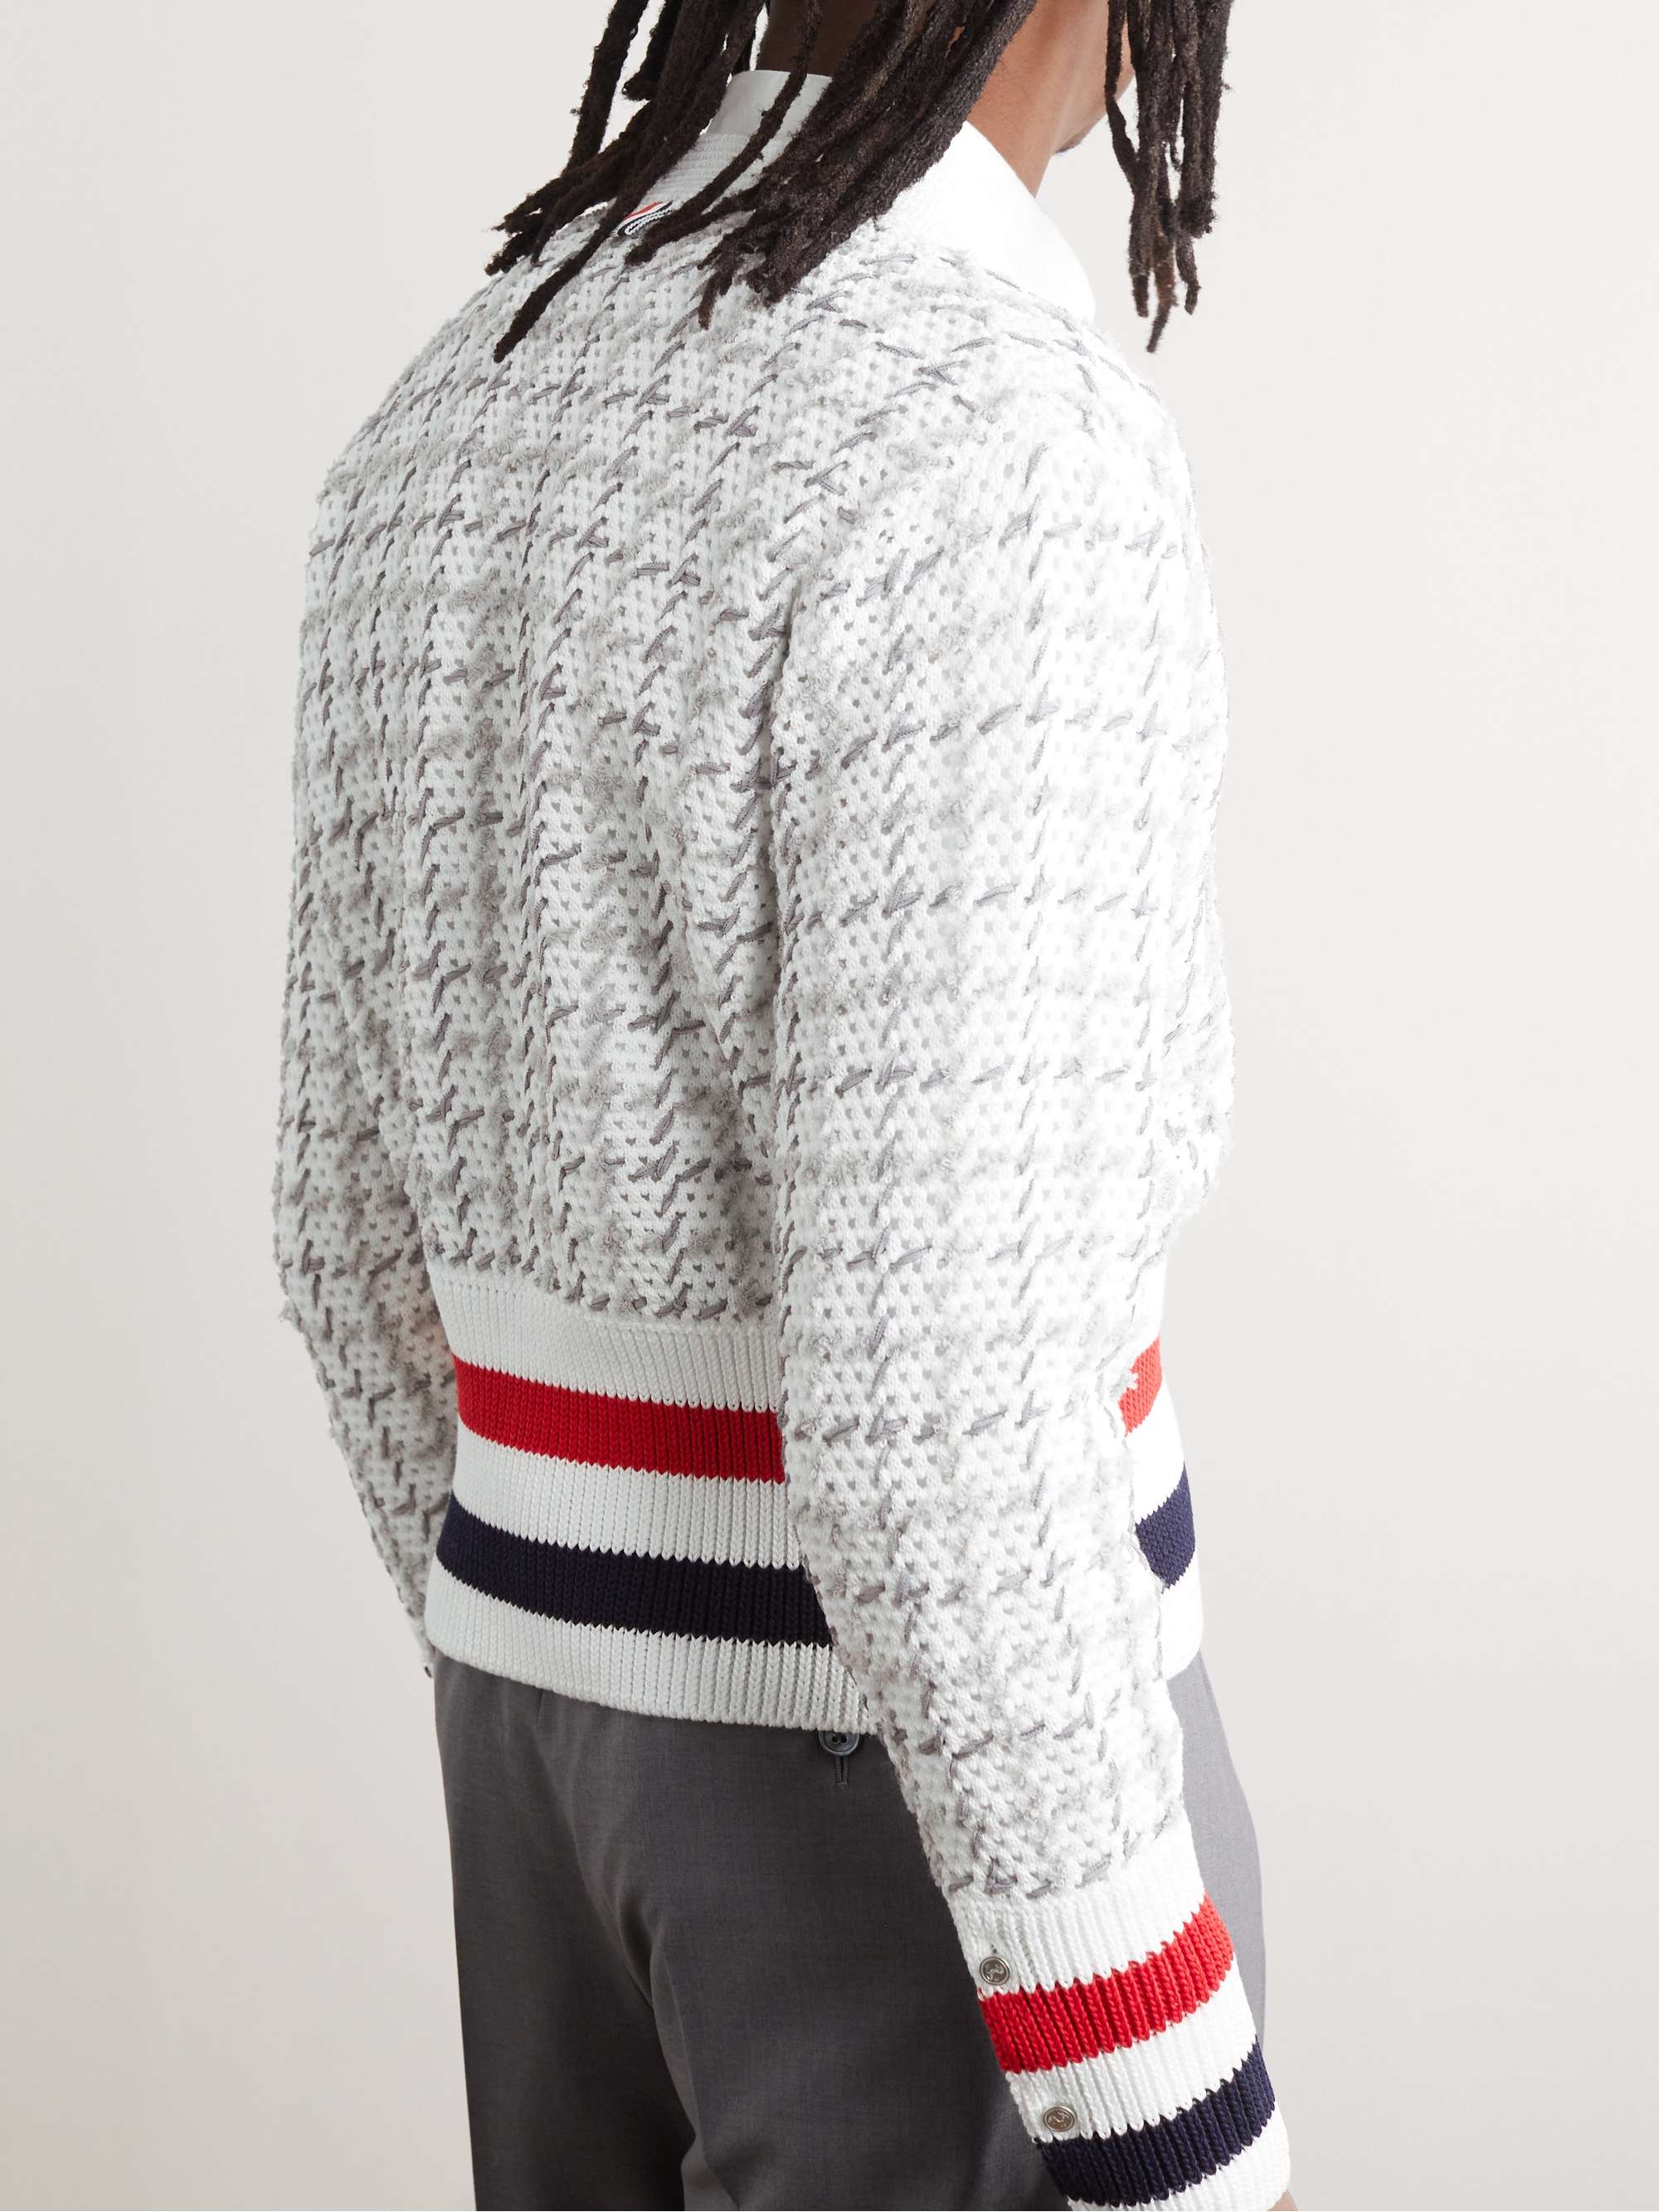 THOM BROWNE Striped Woven Cotton-Blend Cardigan